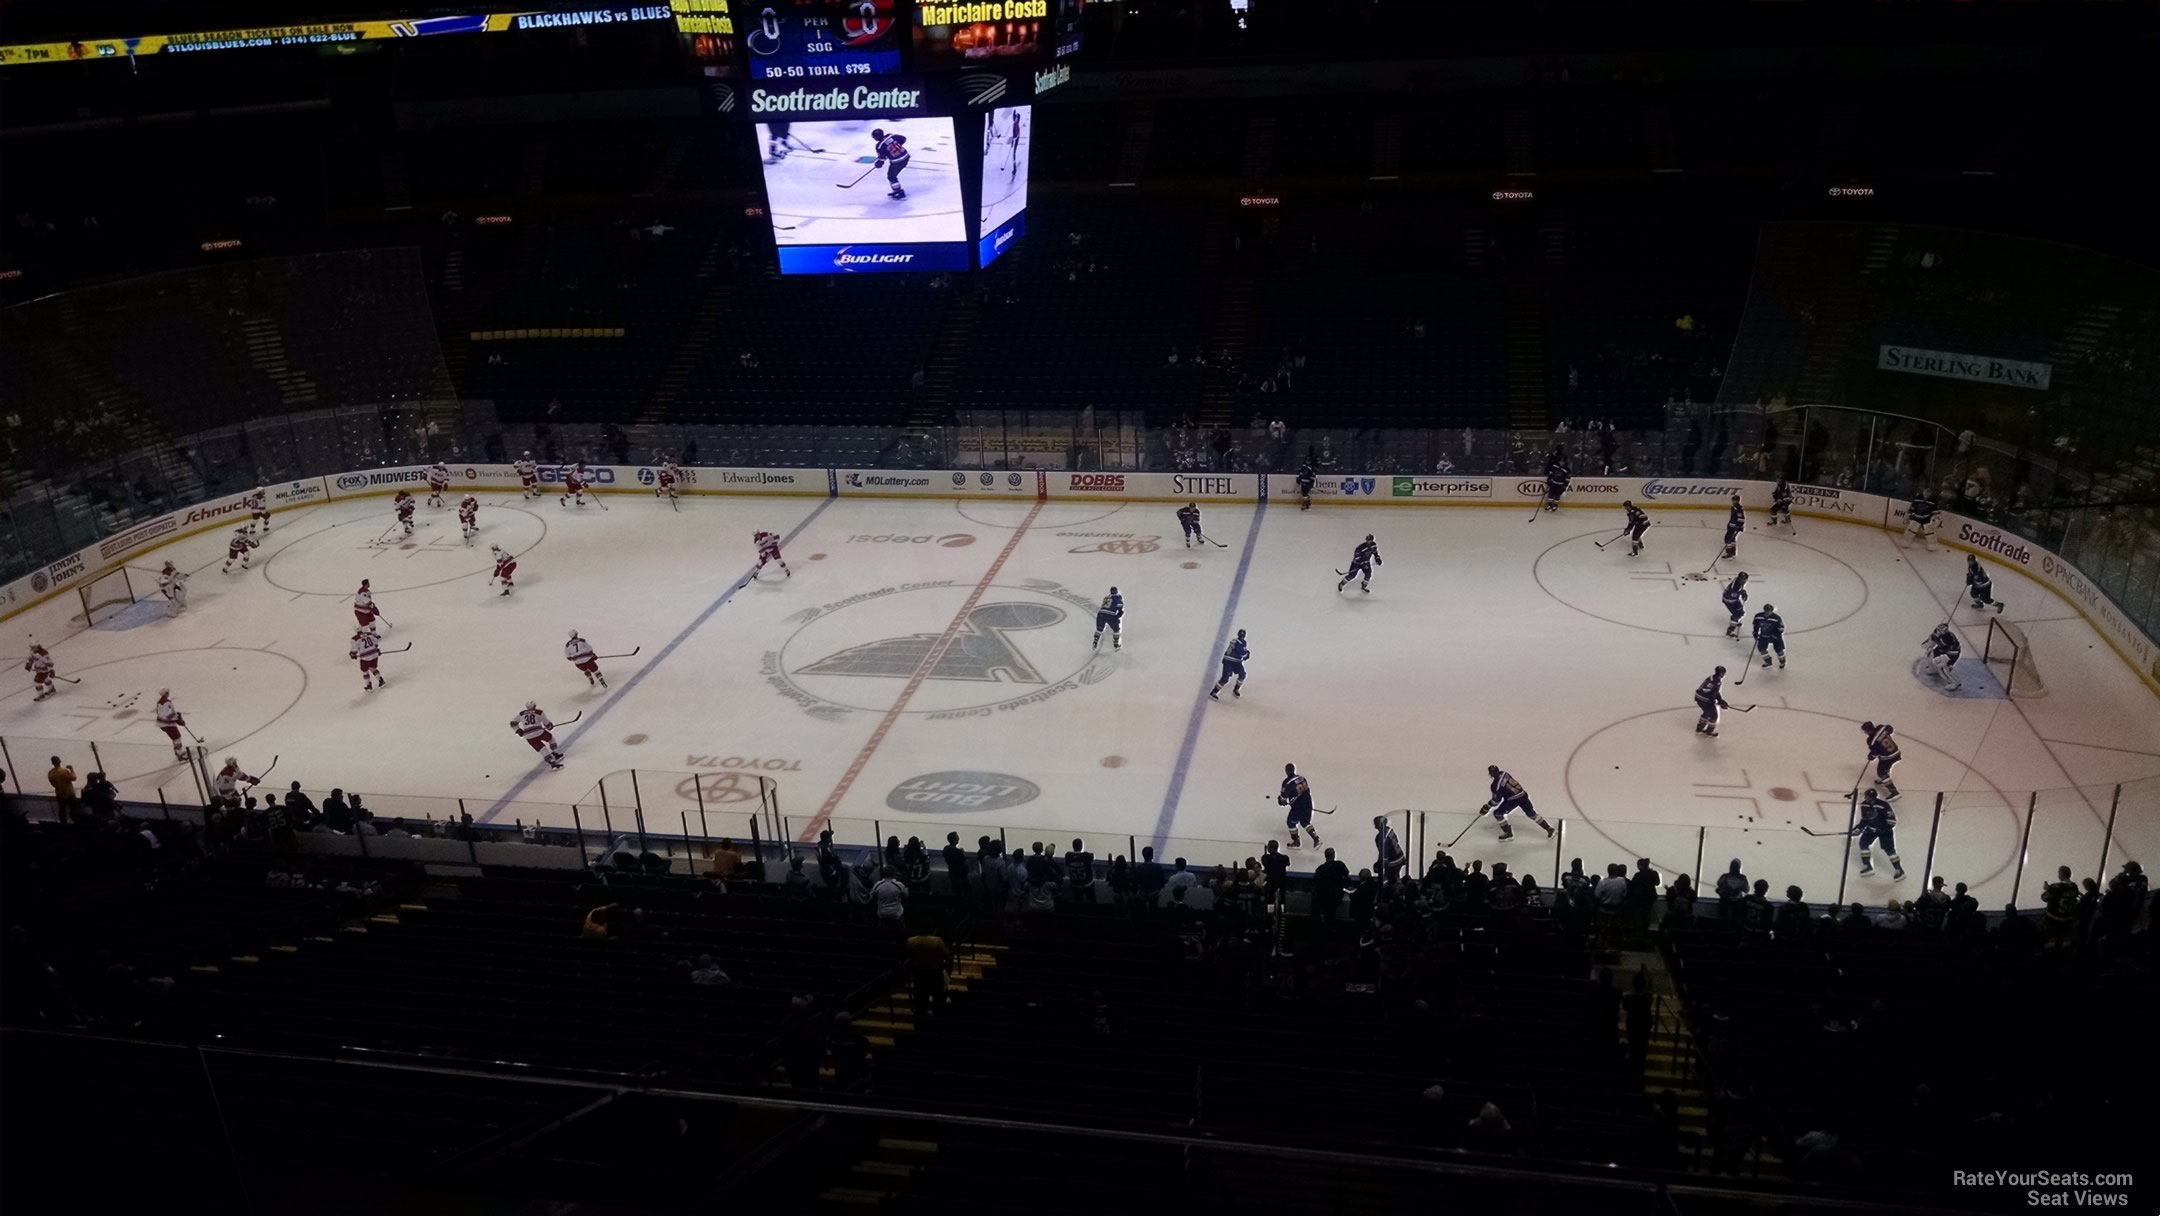 section 302, row b seat view  for hockey - enterprise center